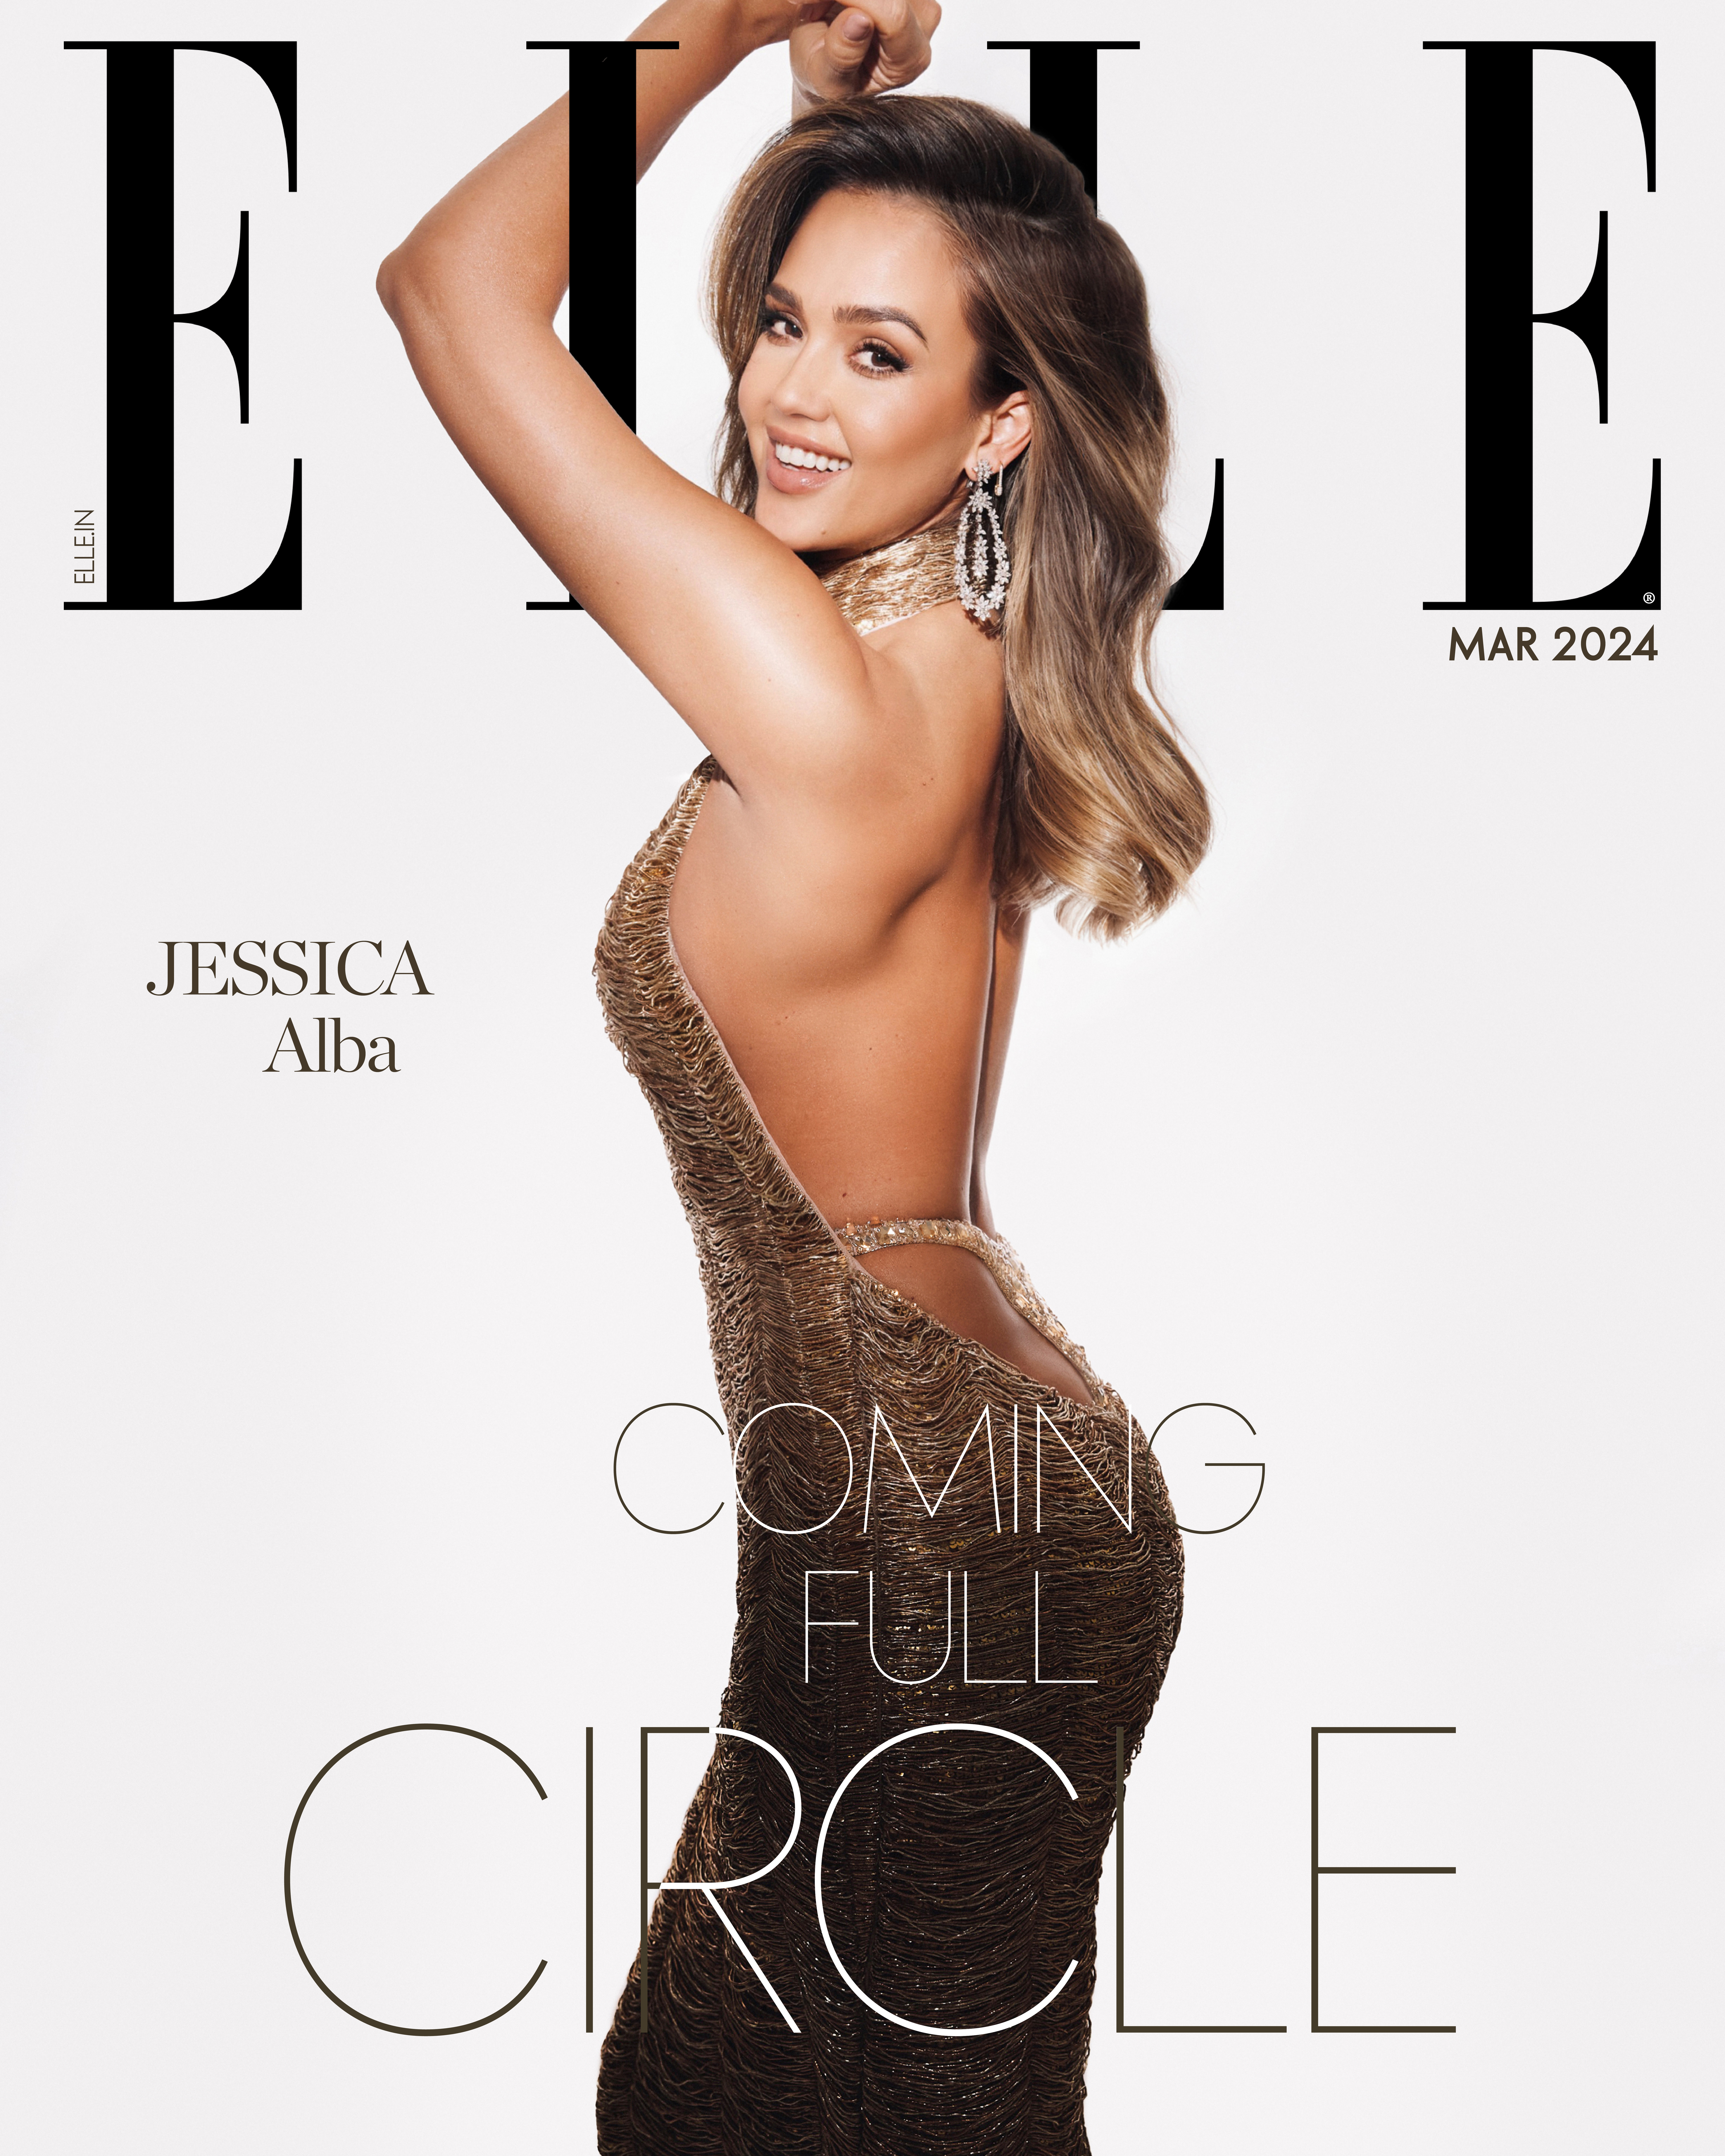 Jessica on the cover of Elle India